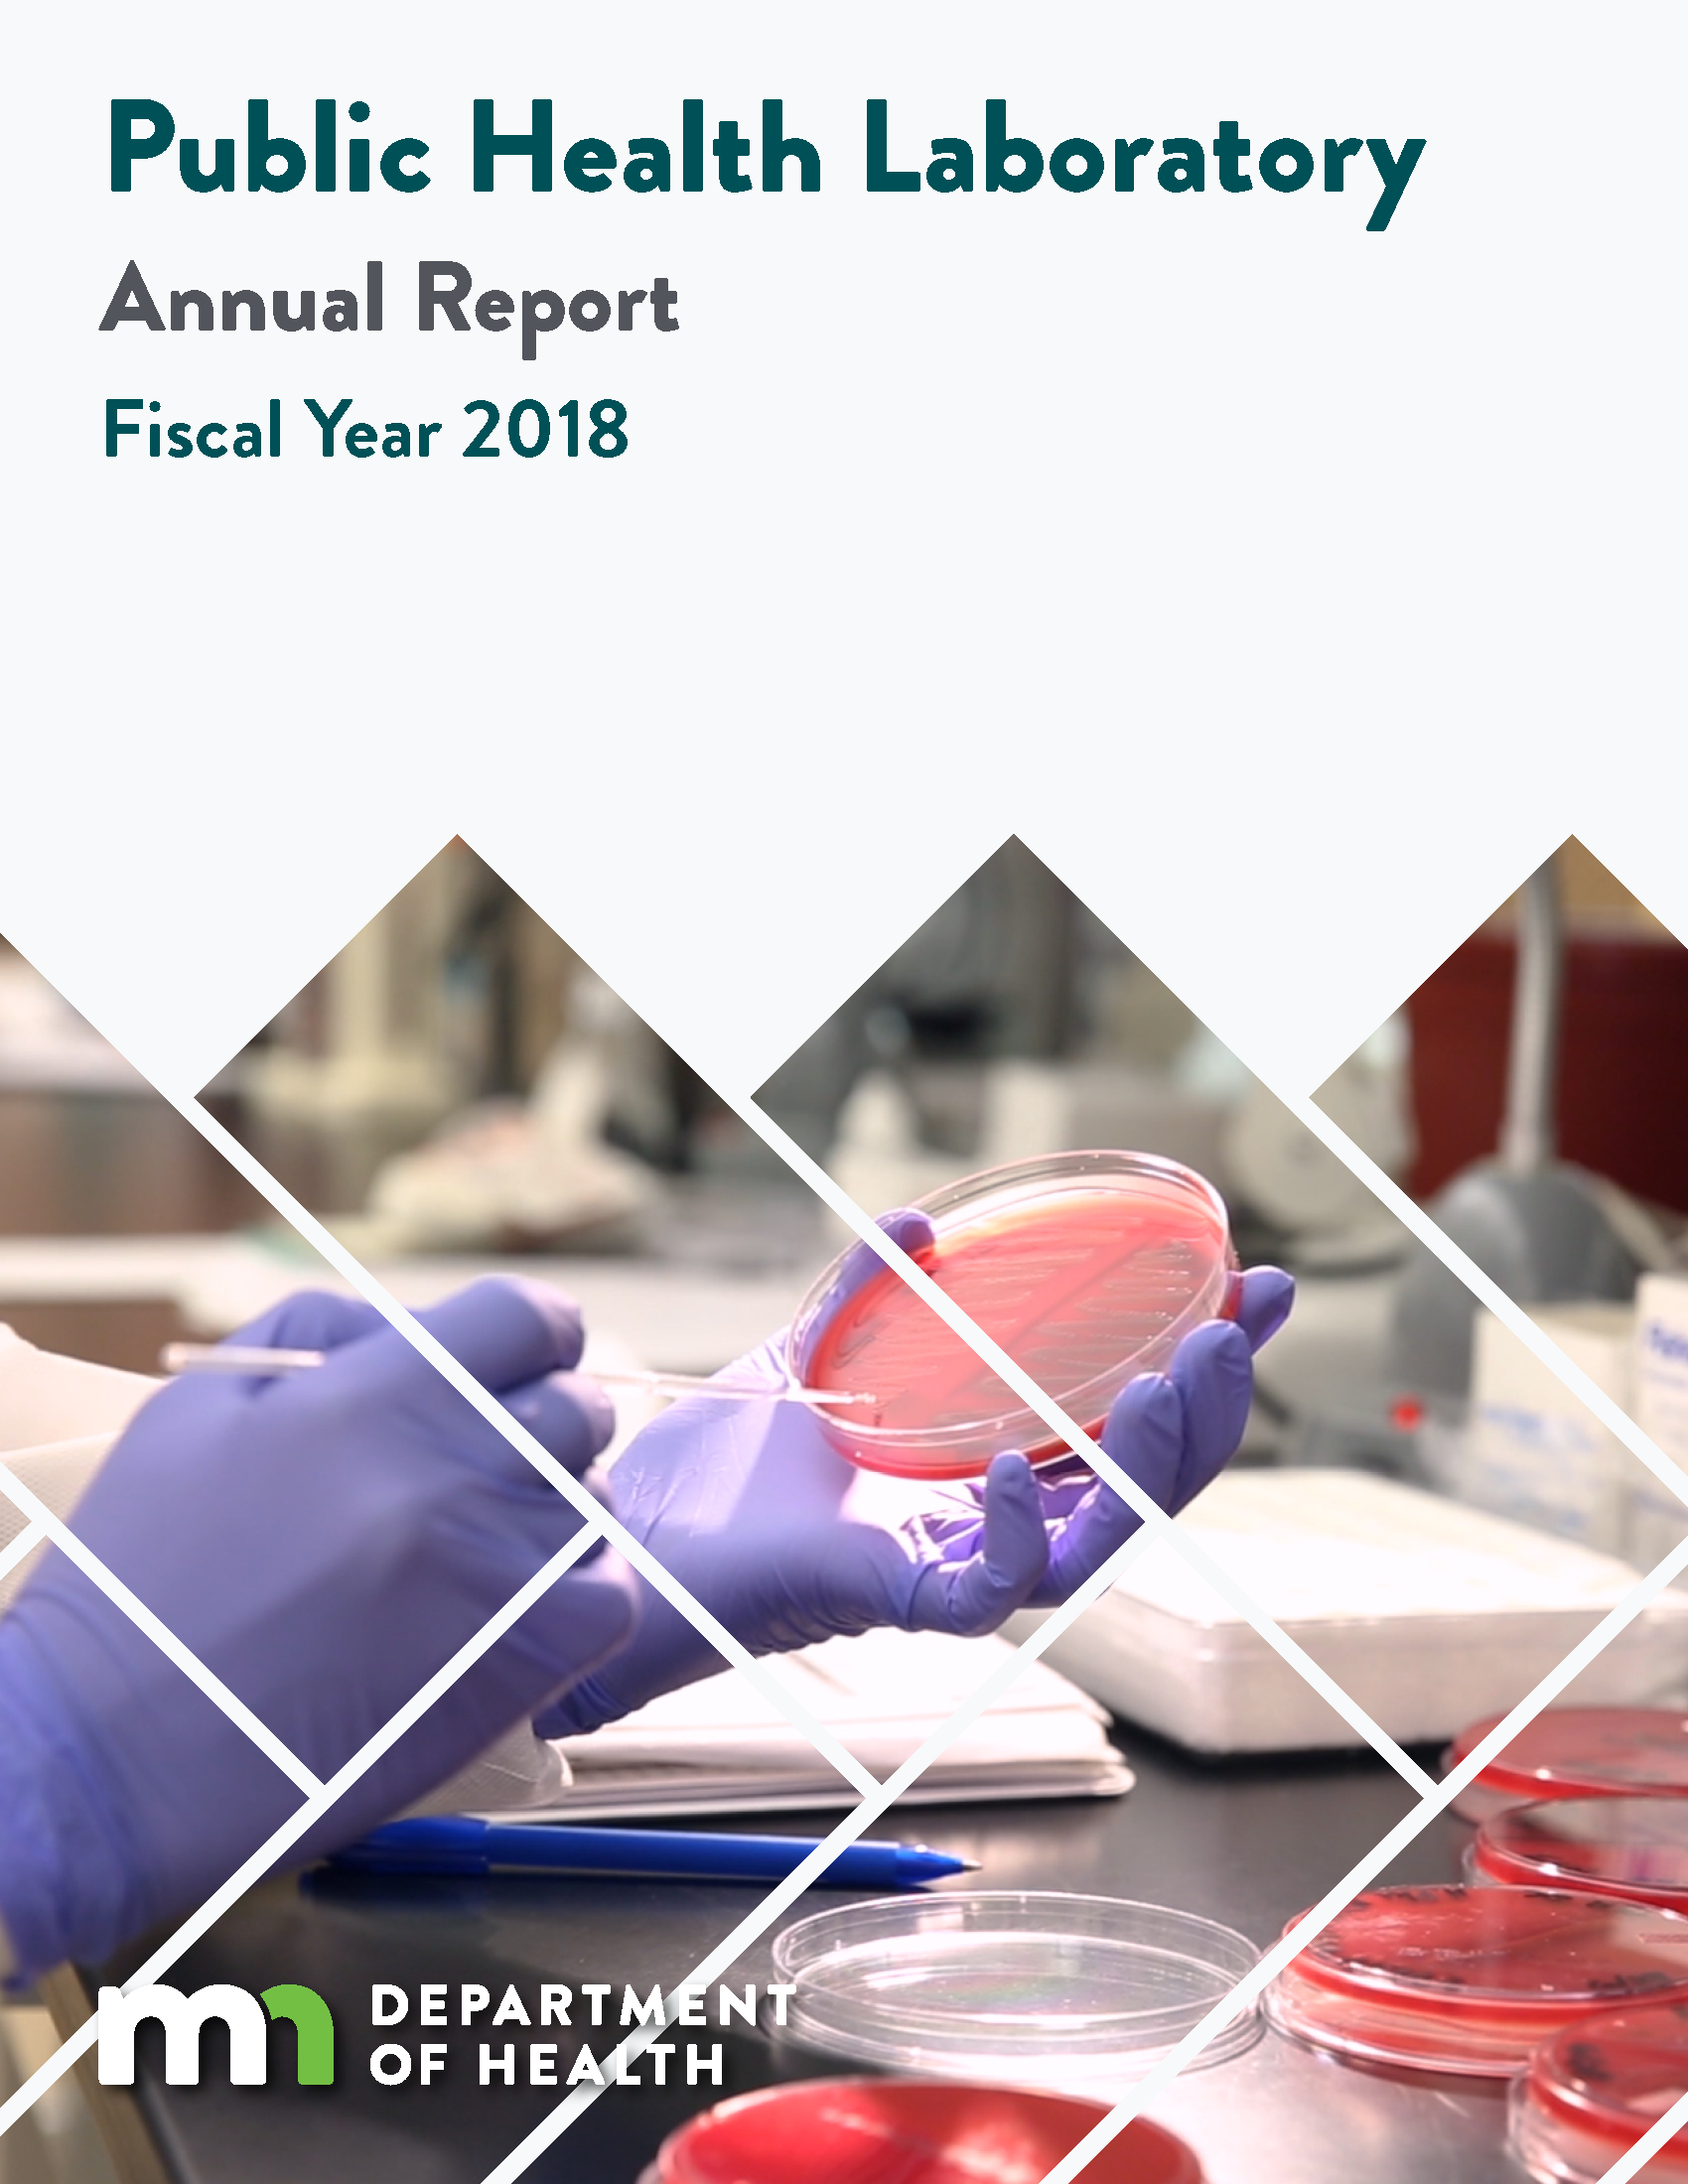 Cover of 2018 PHL Annual Report and link to the 2018 PHL Annual Report PDF